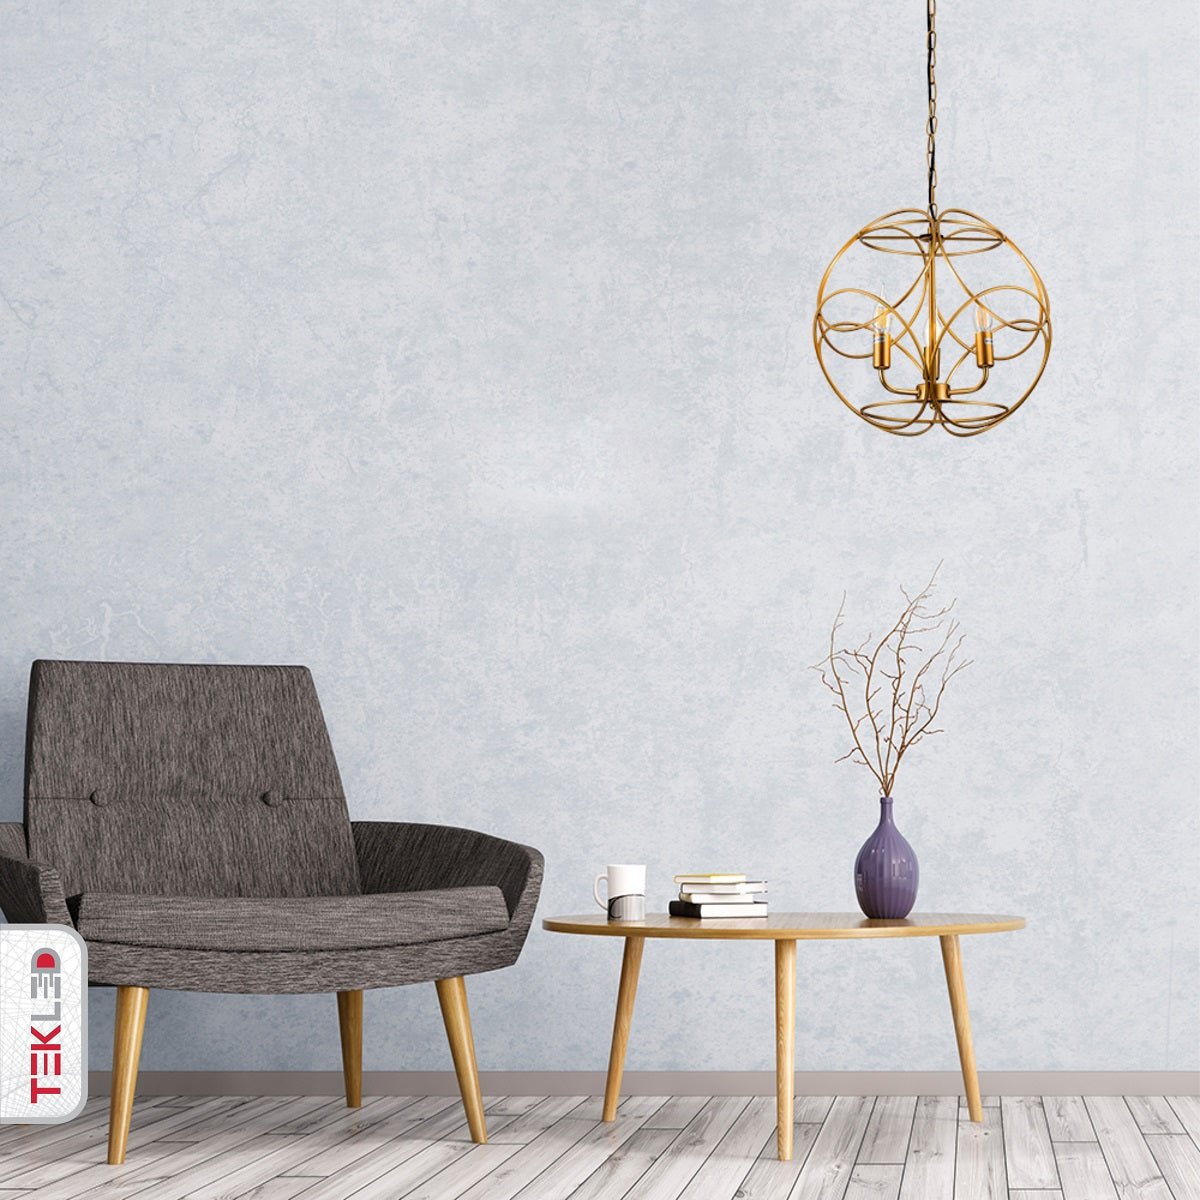 Indoor usage of Gold Aluminium Bronze Globe Cage Pendant Chandelier Light with 3xE14 Fittings | TEKLED 159-17448